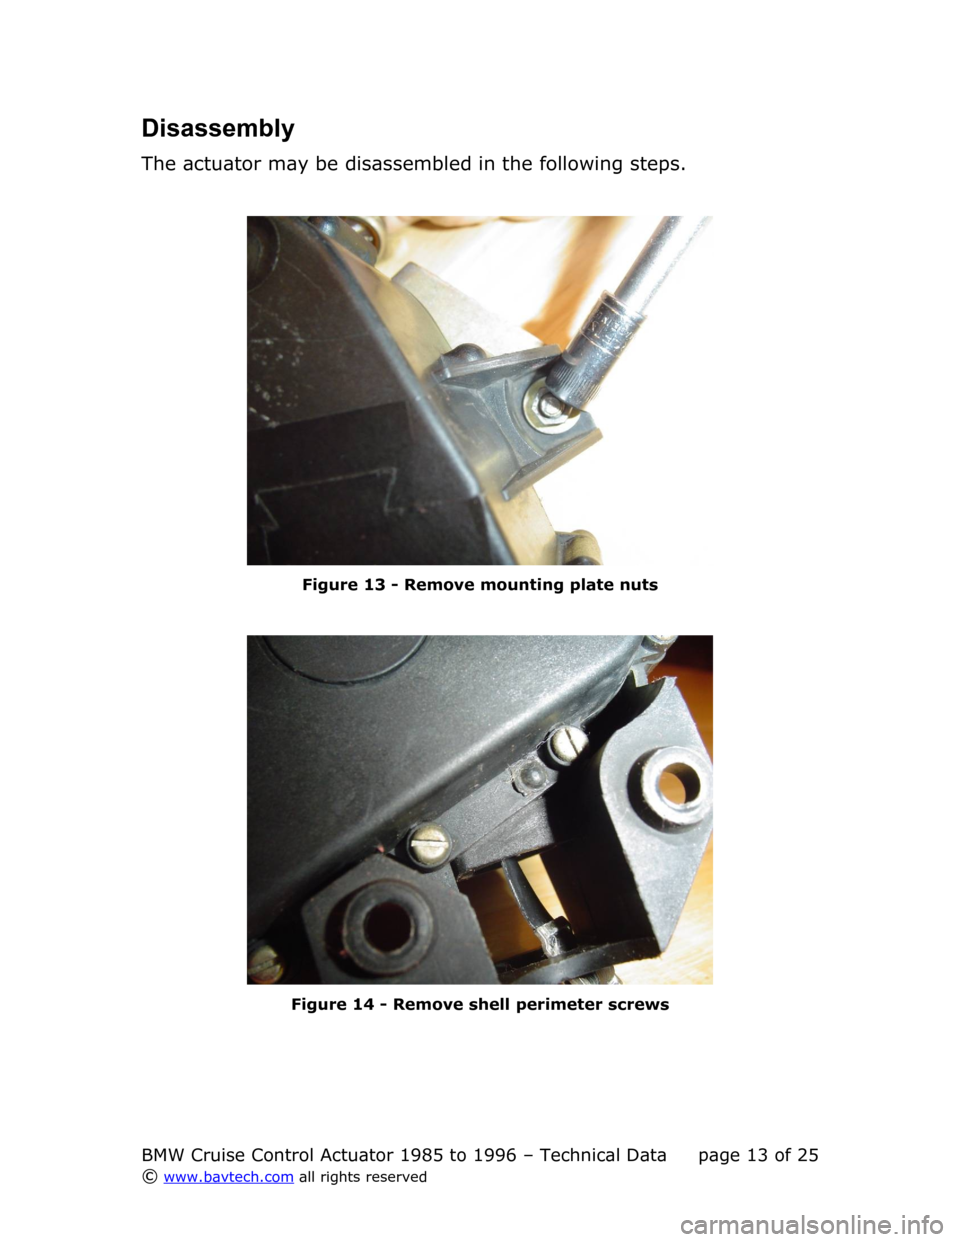 BMW 3 SERIES 1995 E36 Cruise Control Acutator Disassembly
The actuator may be disassembled in the following steps.
Figure  13  - Remove mounting plate nuts
Figure  14  - Remove shell perimeter screws
BMW Cruise Control Actuator 1985 to 1996 – T